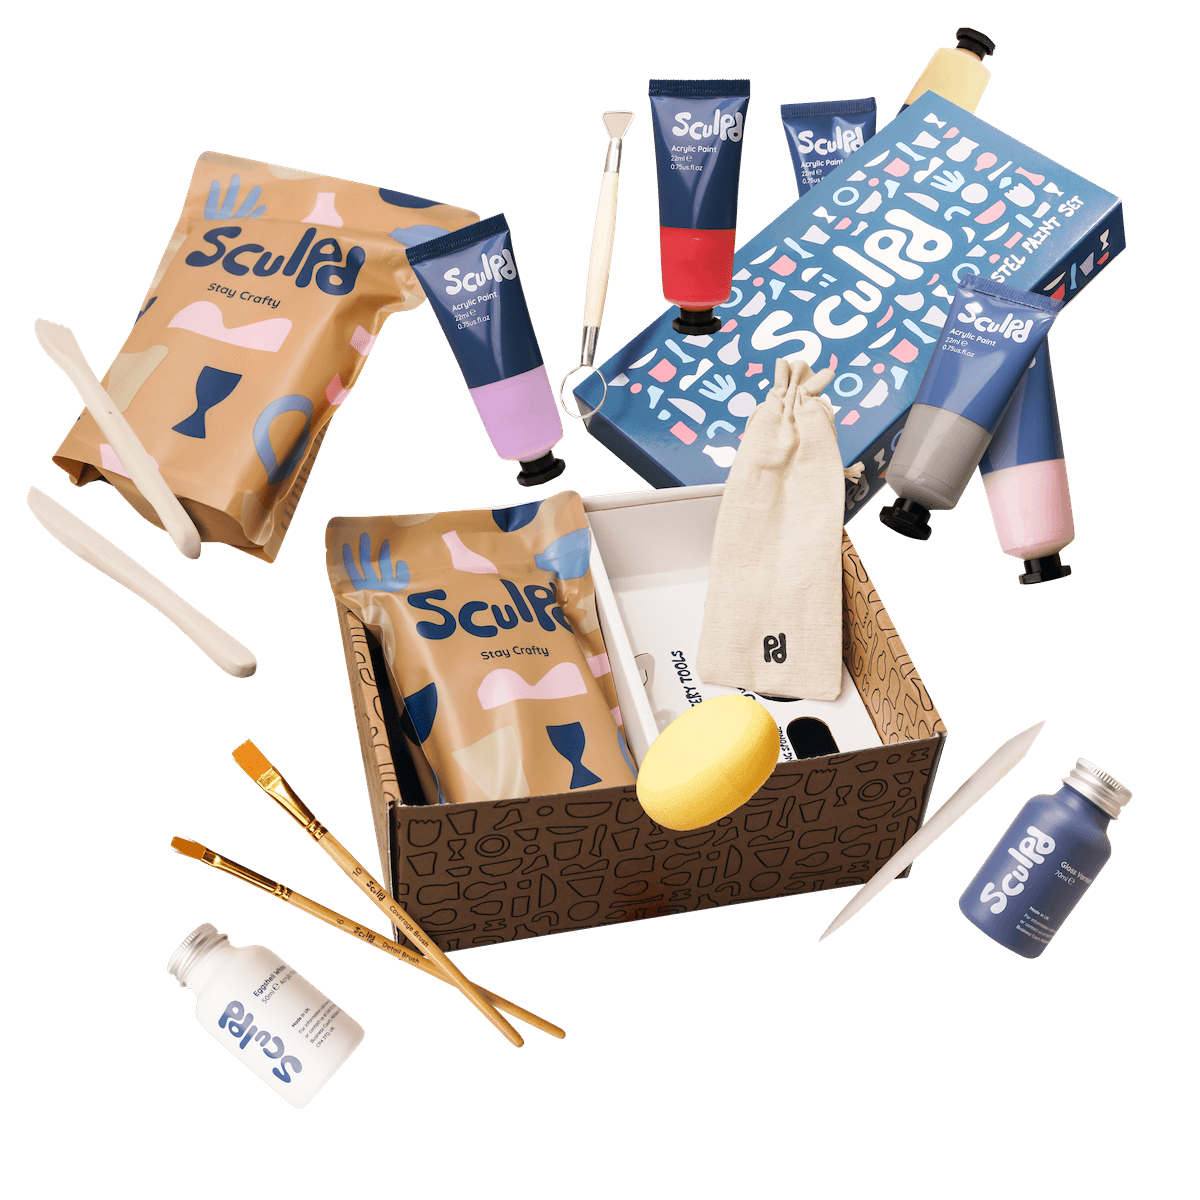 Candle Making & Canvas Painting Bundle - The 2-in-1 Craft Bundle – Sculpd